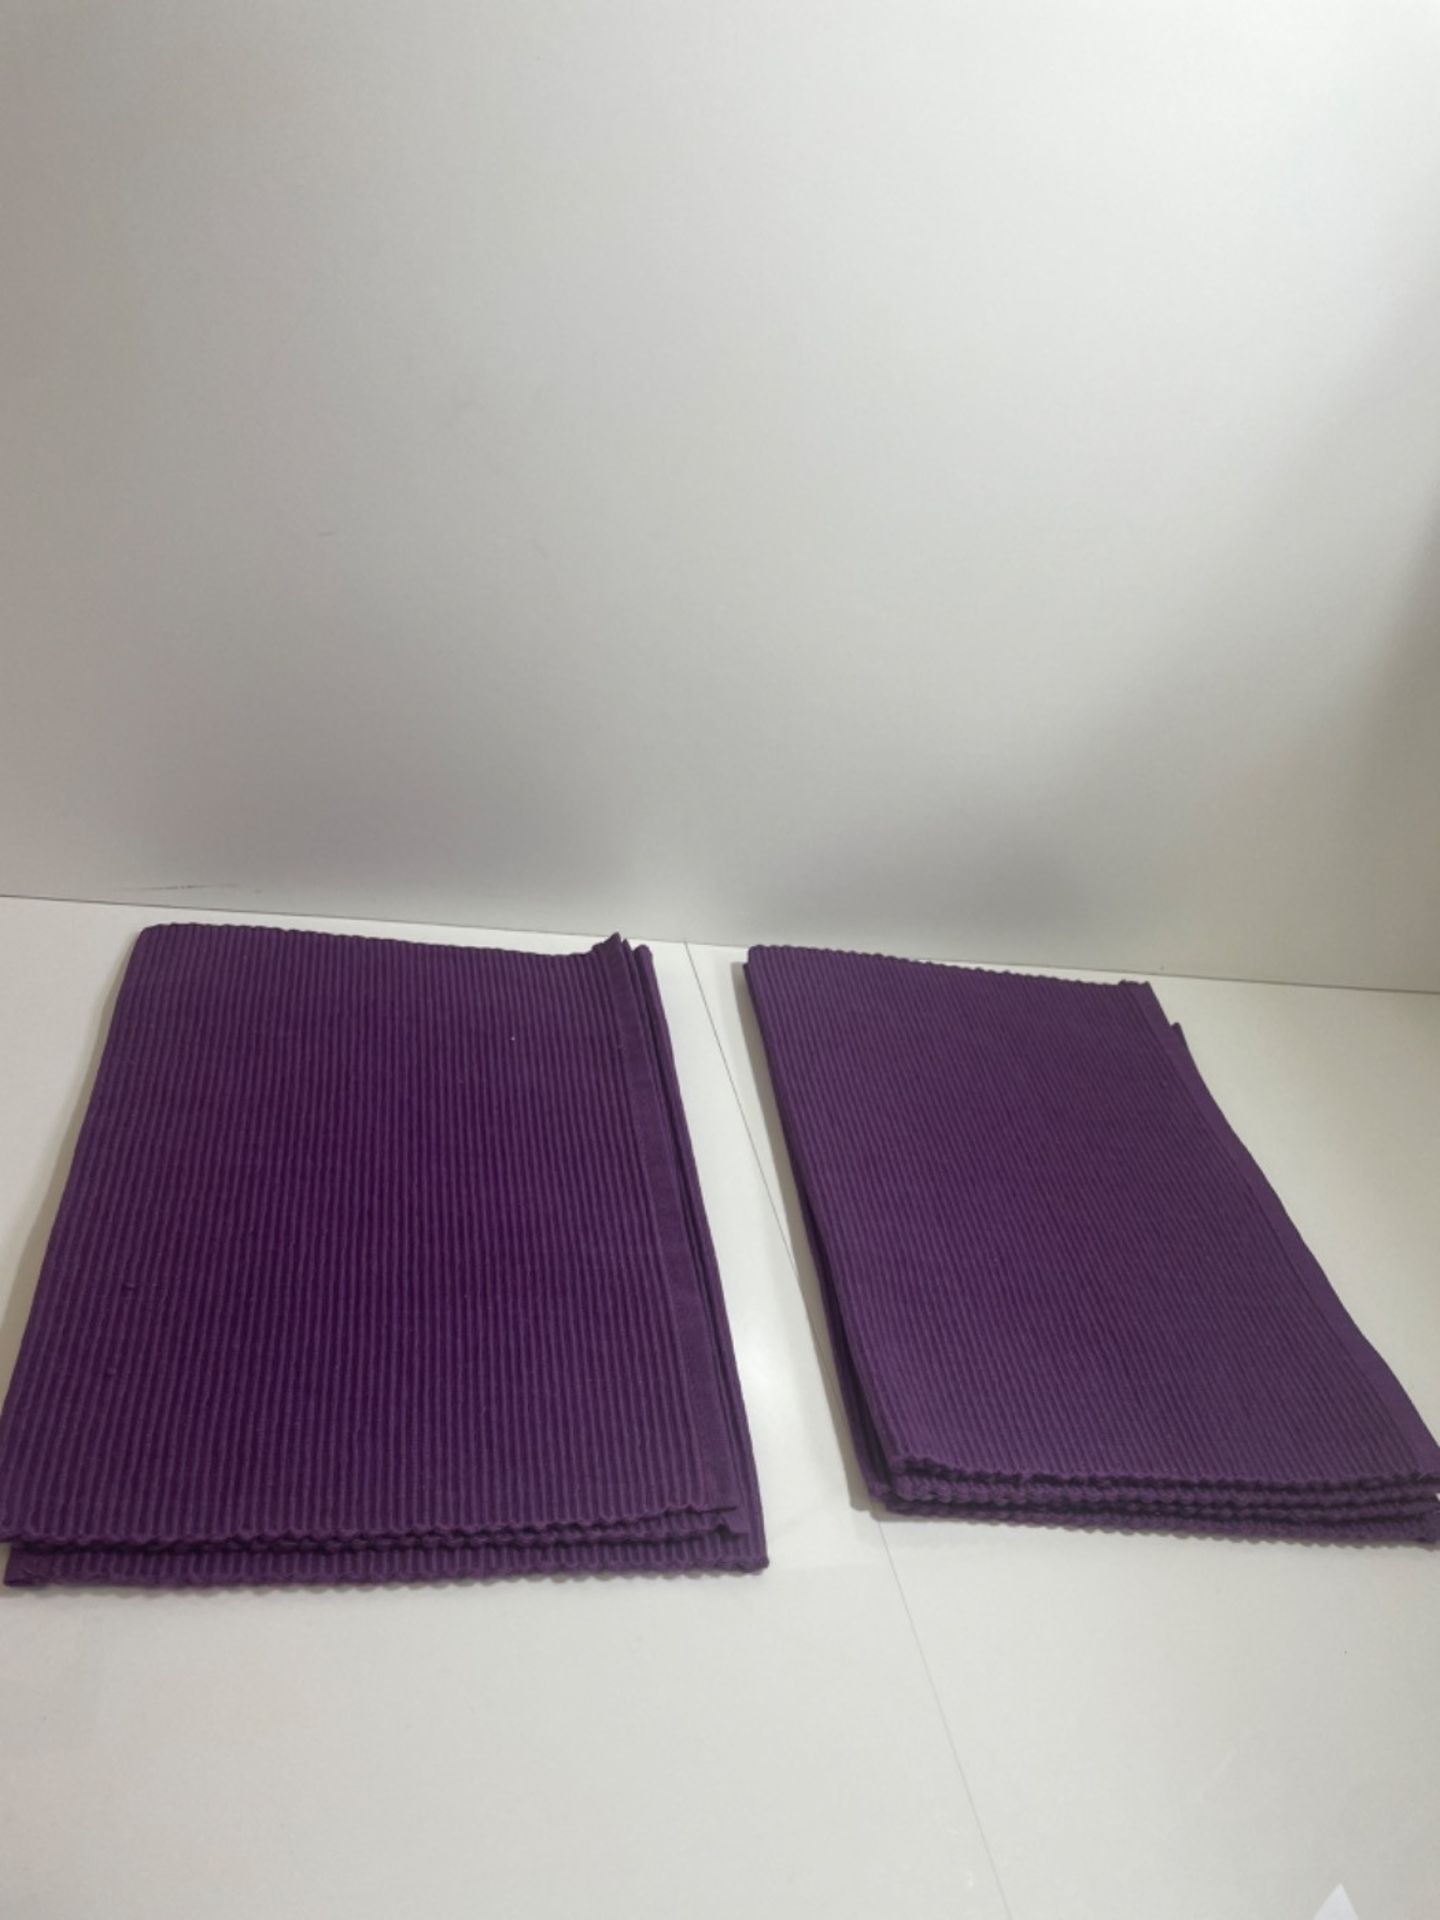 DII Basic Everyday Ribbed Tabletop 100% Cotton, Placemat Set, 13X19, Eggplant, 6 Piece - Image 3 of 3